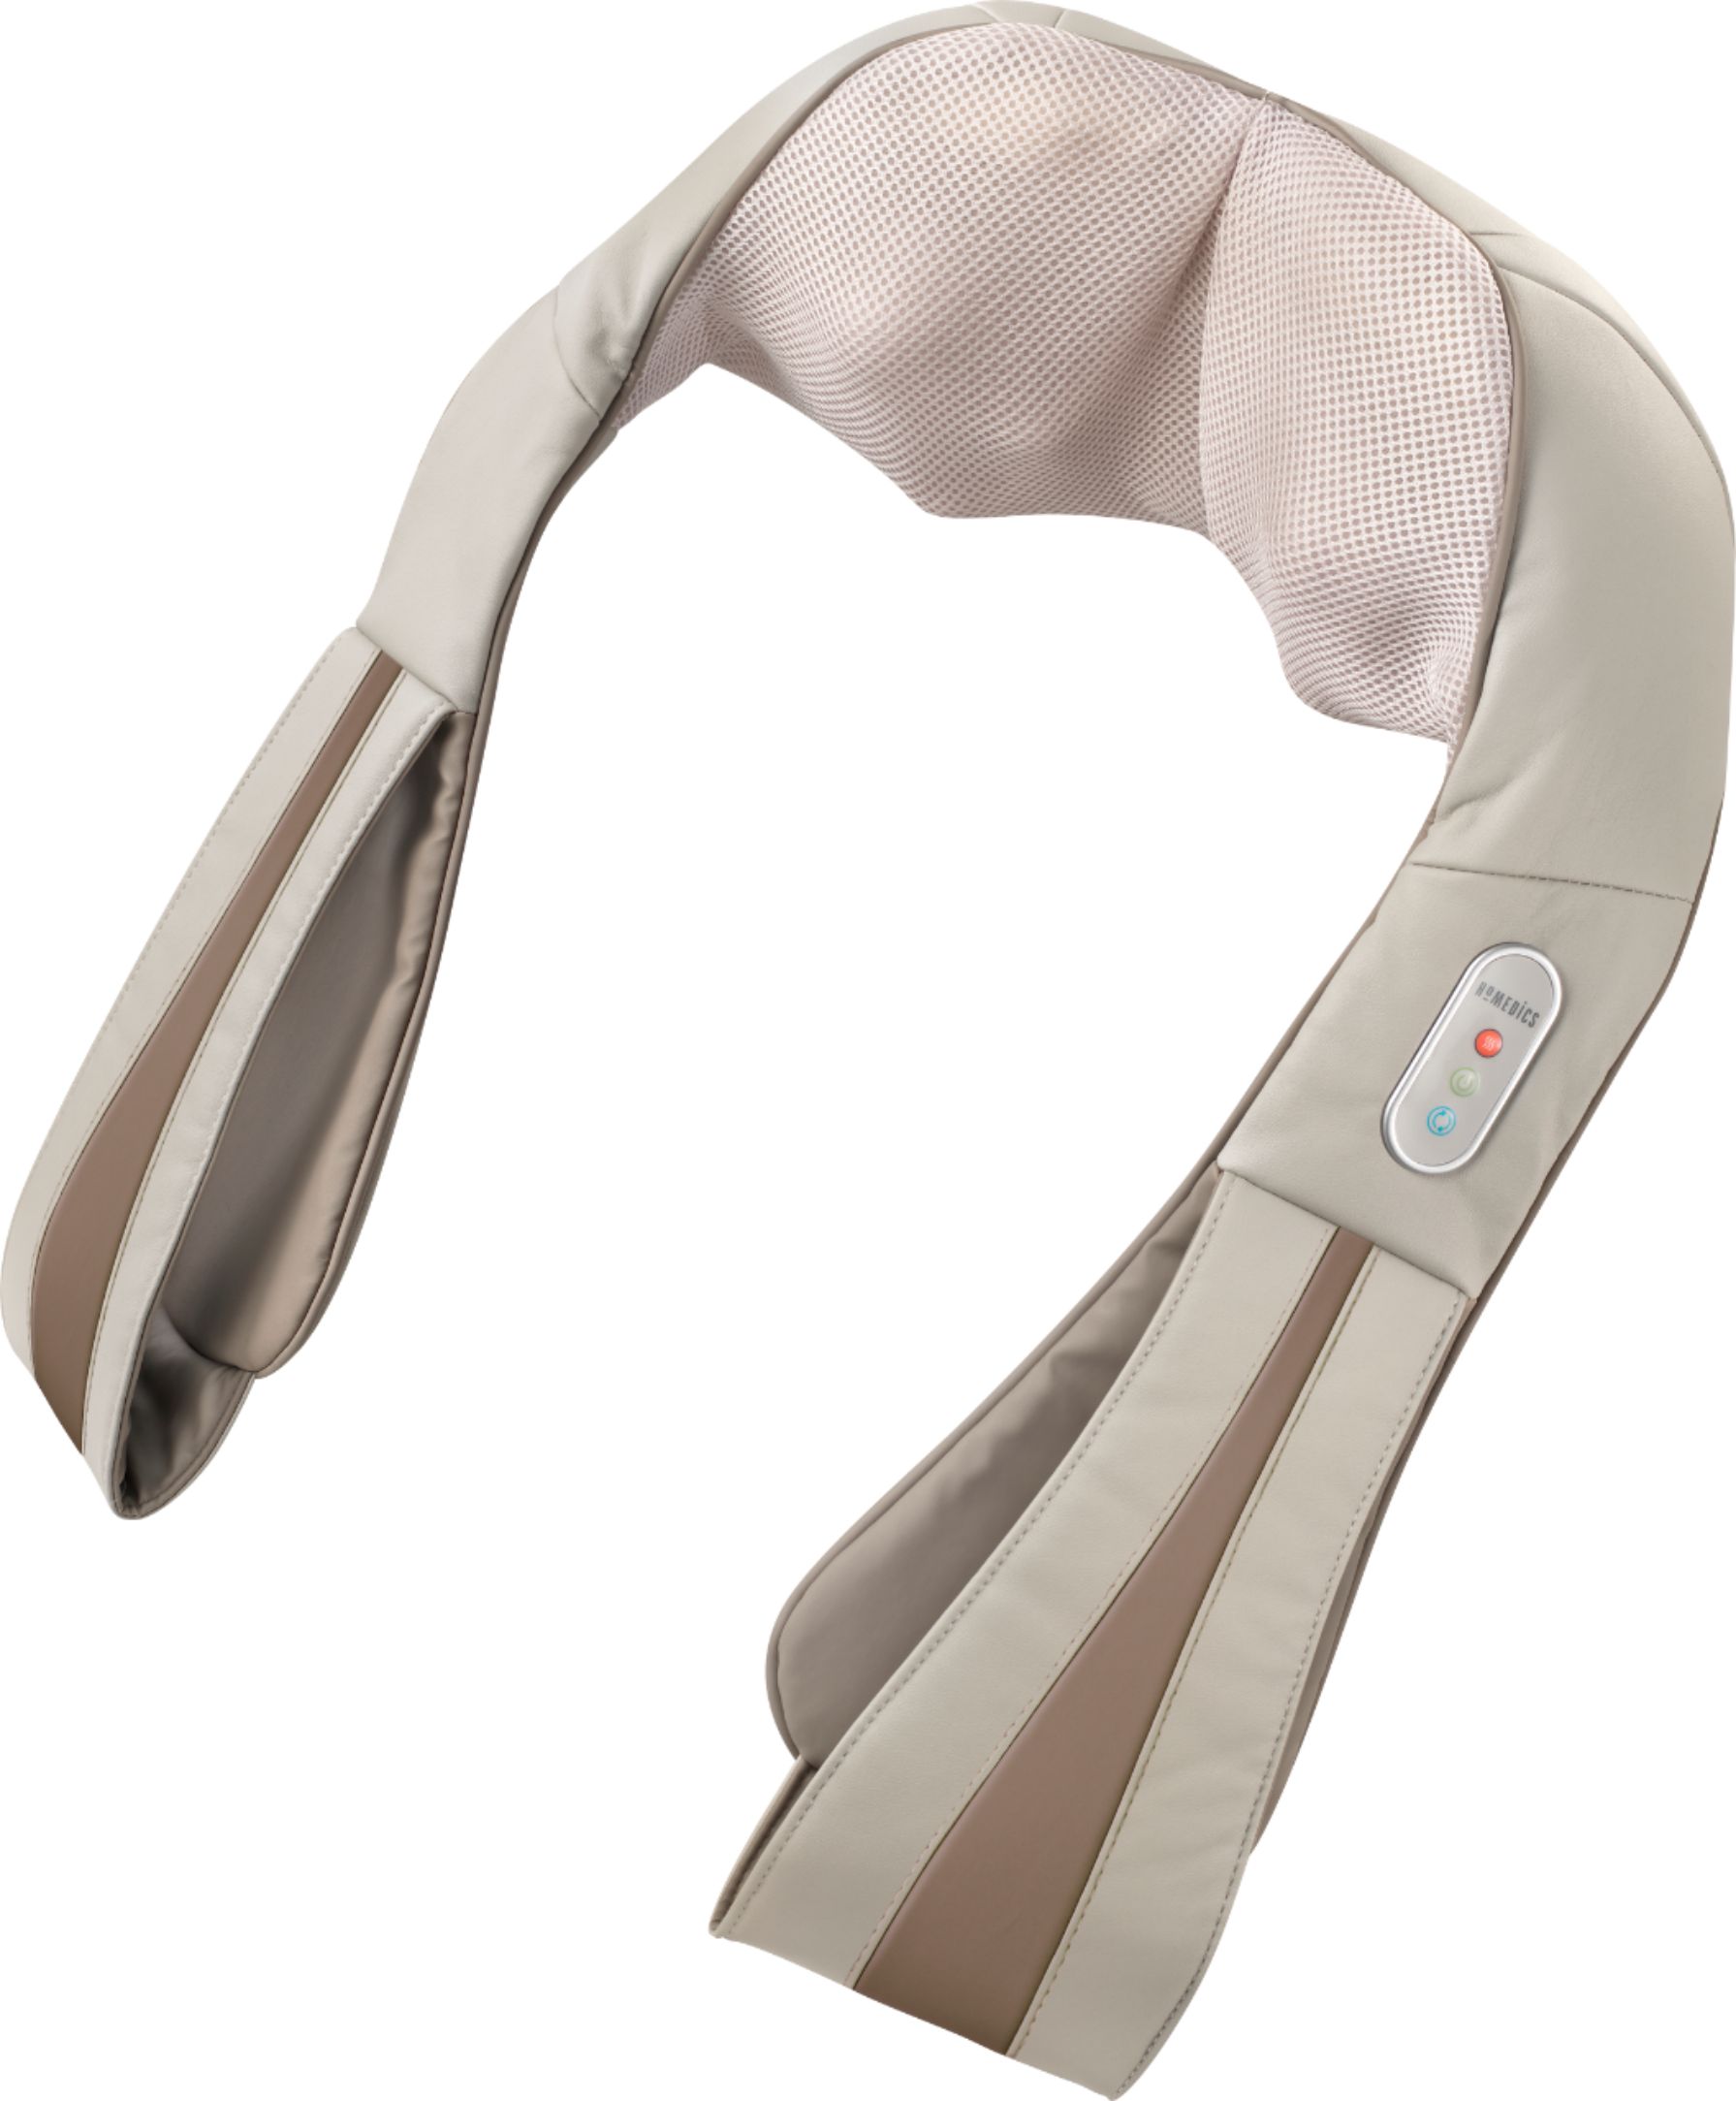 HoMedics - Shiatsu Deluxe Neck and Shoulder Massager with Heat - Gray